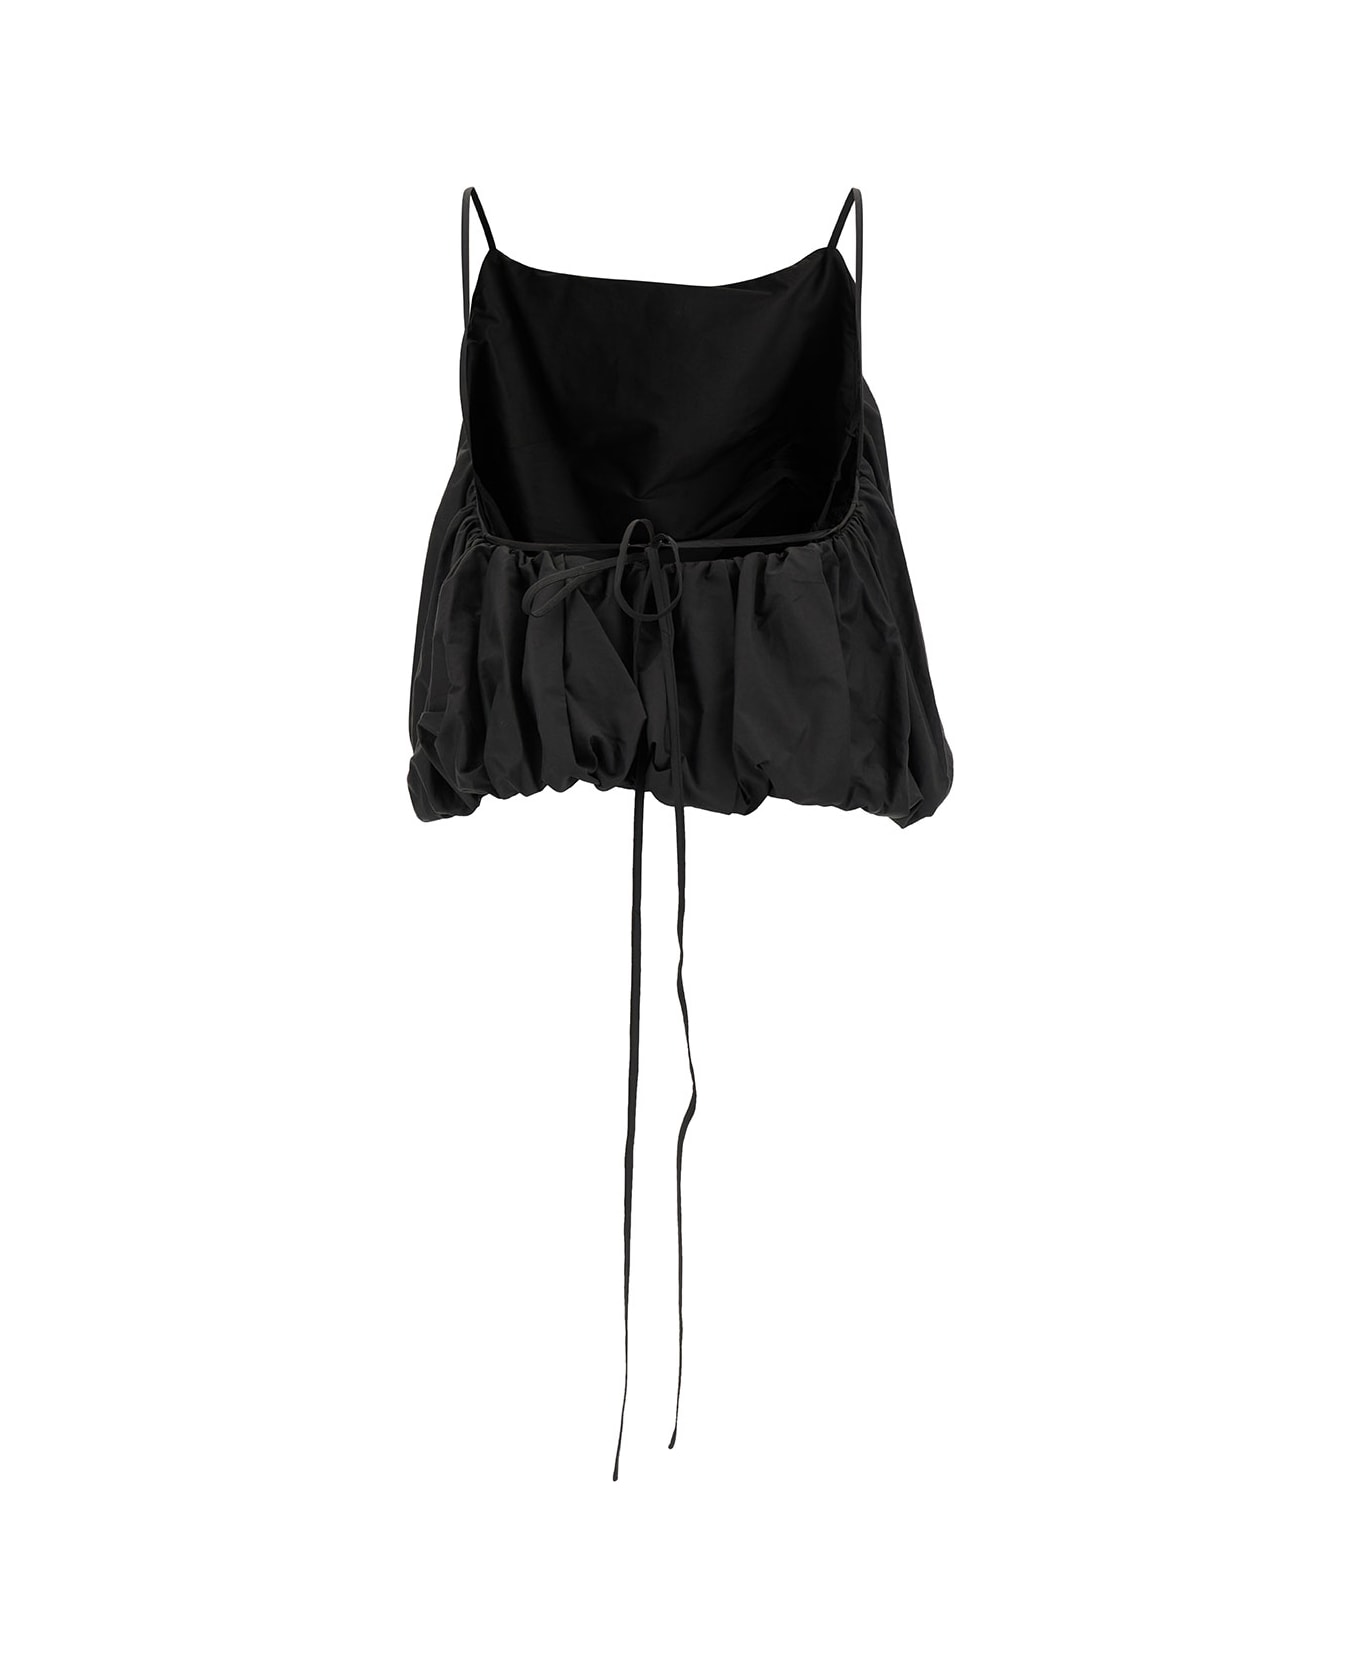 Low Classic Black Voluminous Top With Open Back In Cotton Blend Woman - Black トップス